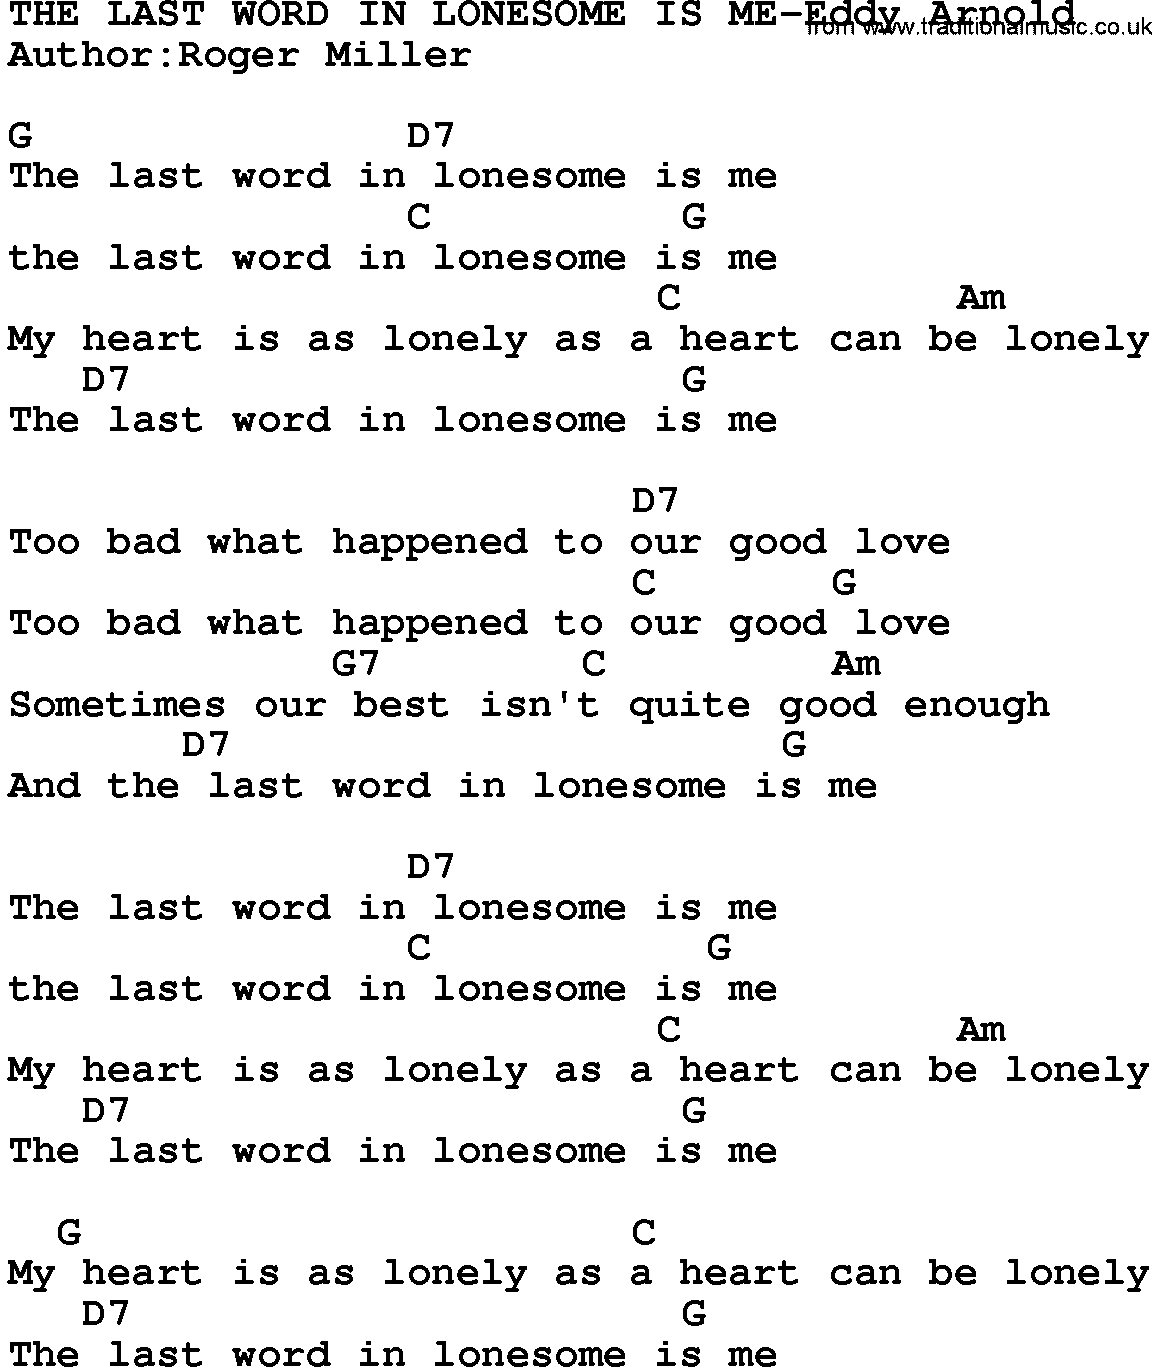 Country music song: The Last Word In Lonesome Is Me-Eddy Arnold  lyrics and chords